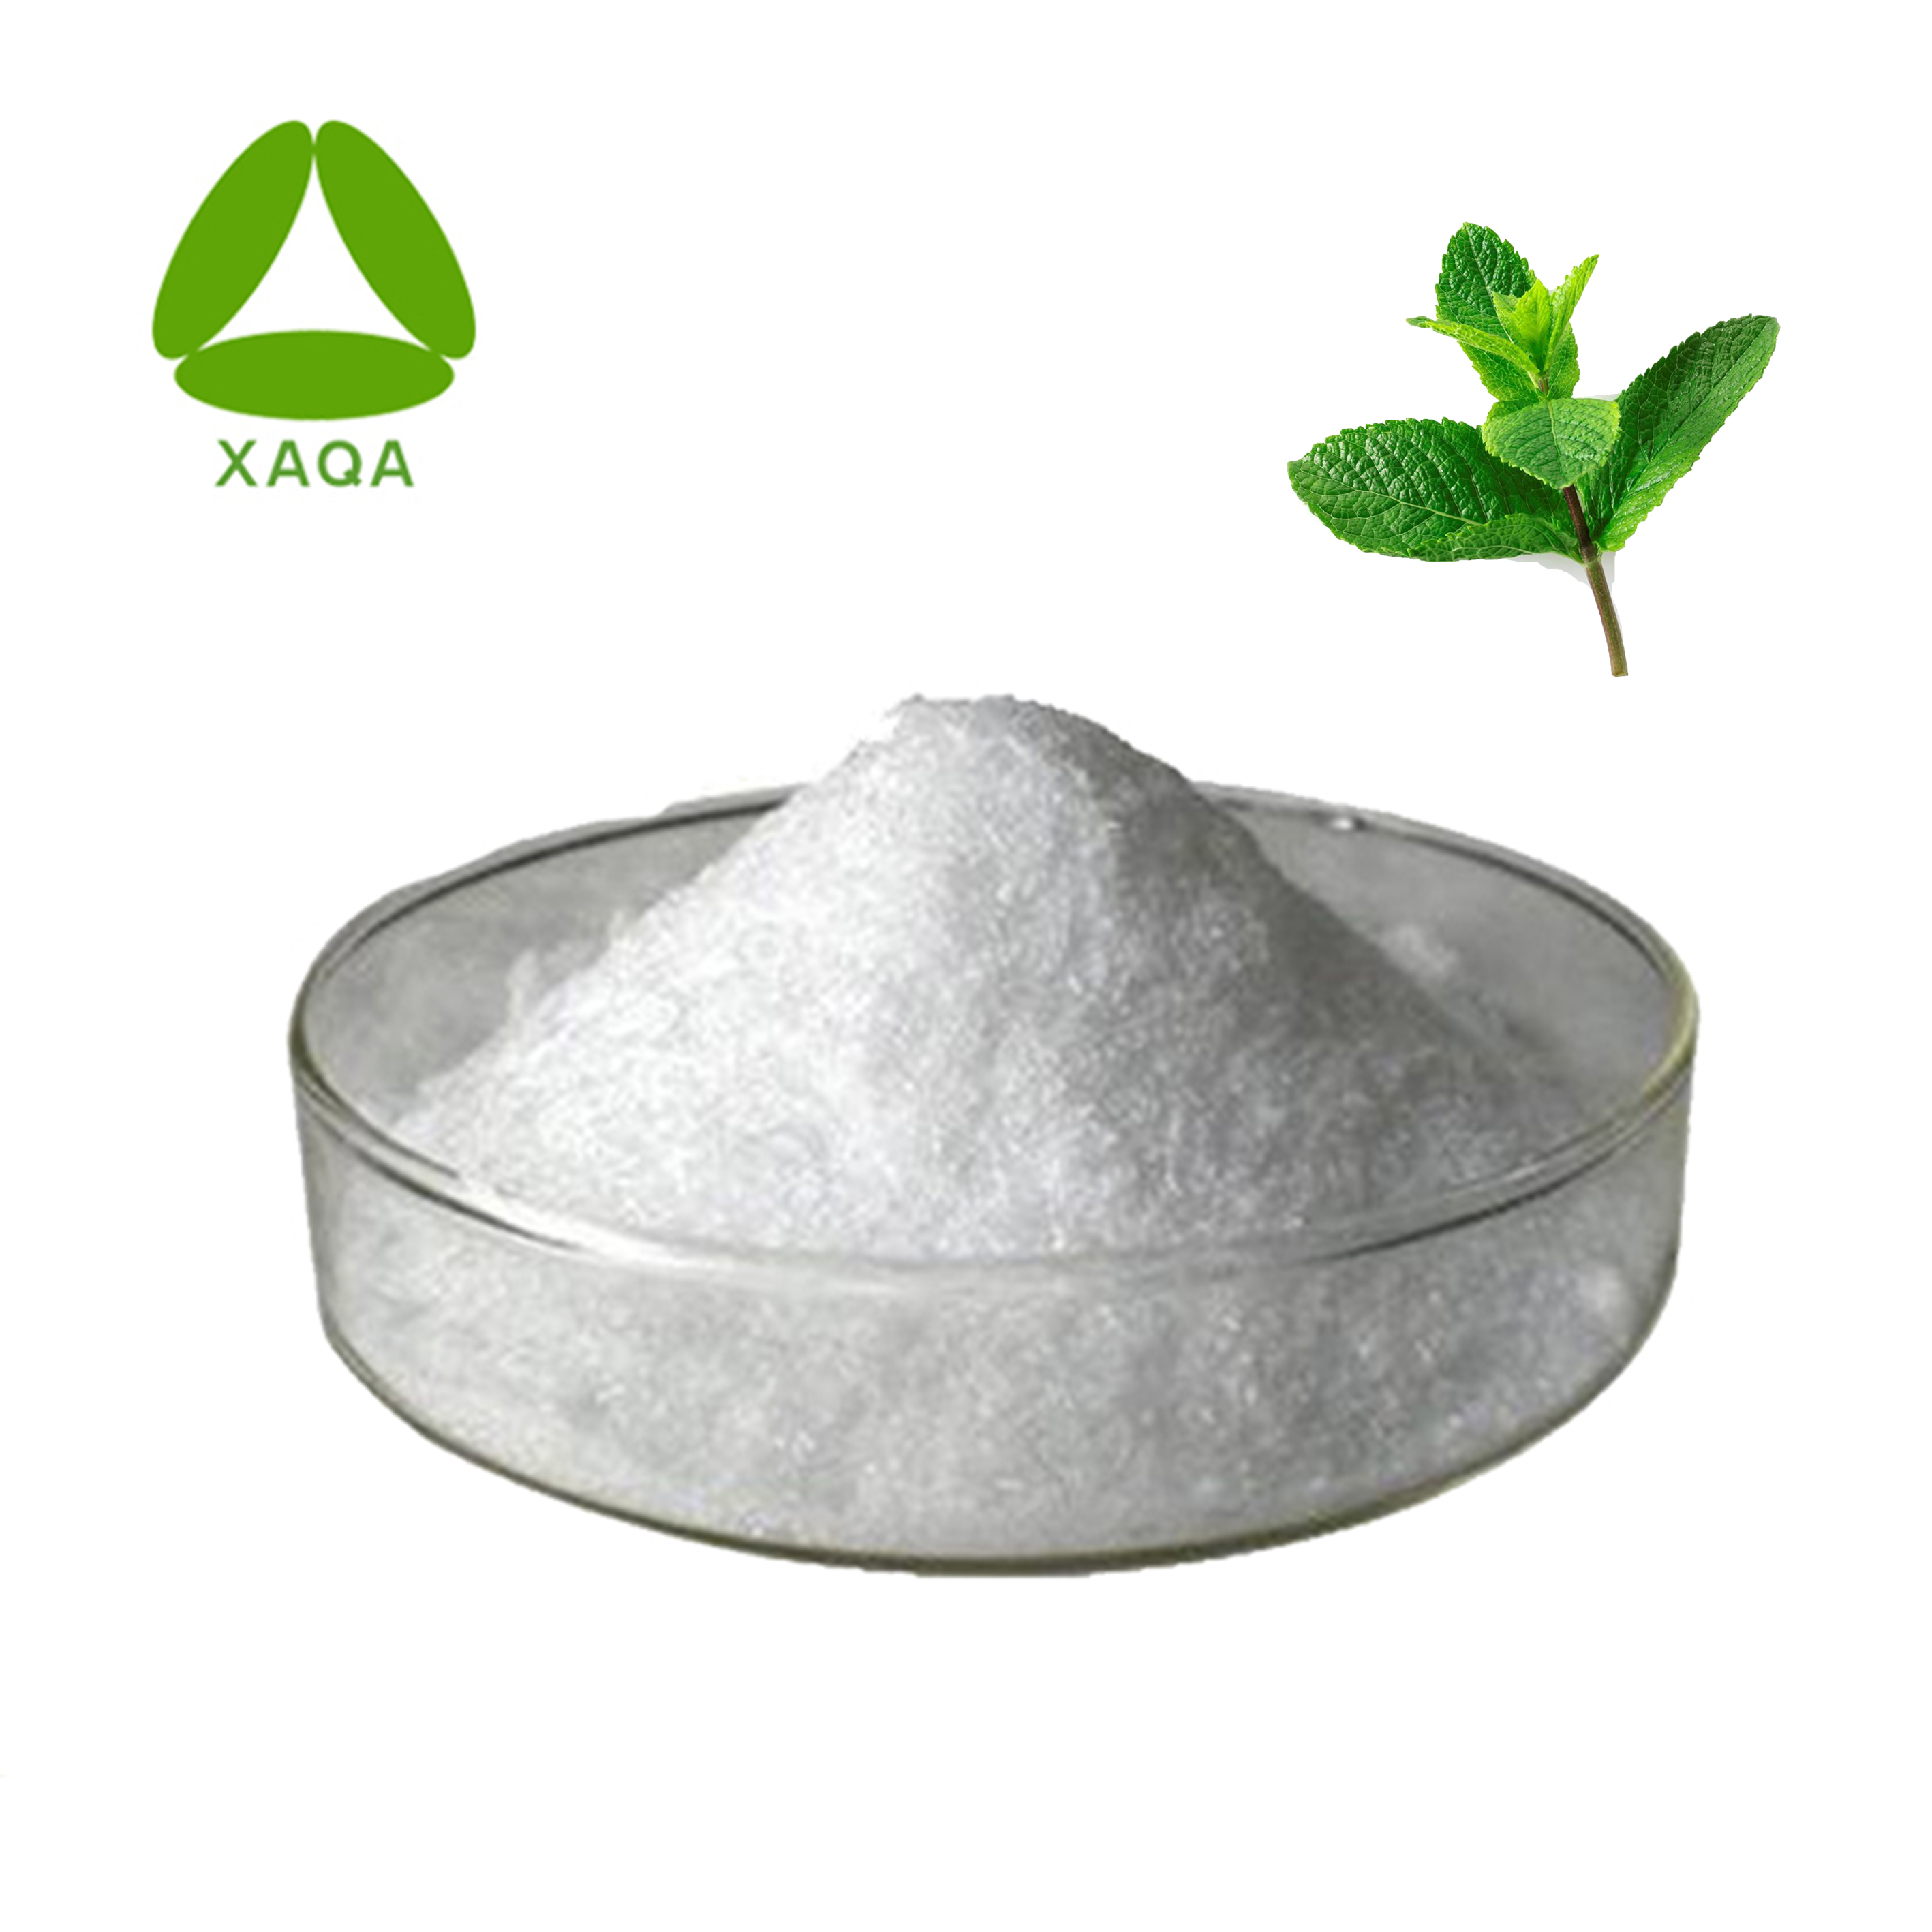 Peppermint Leaf Extract powder 